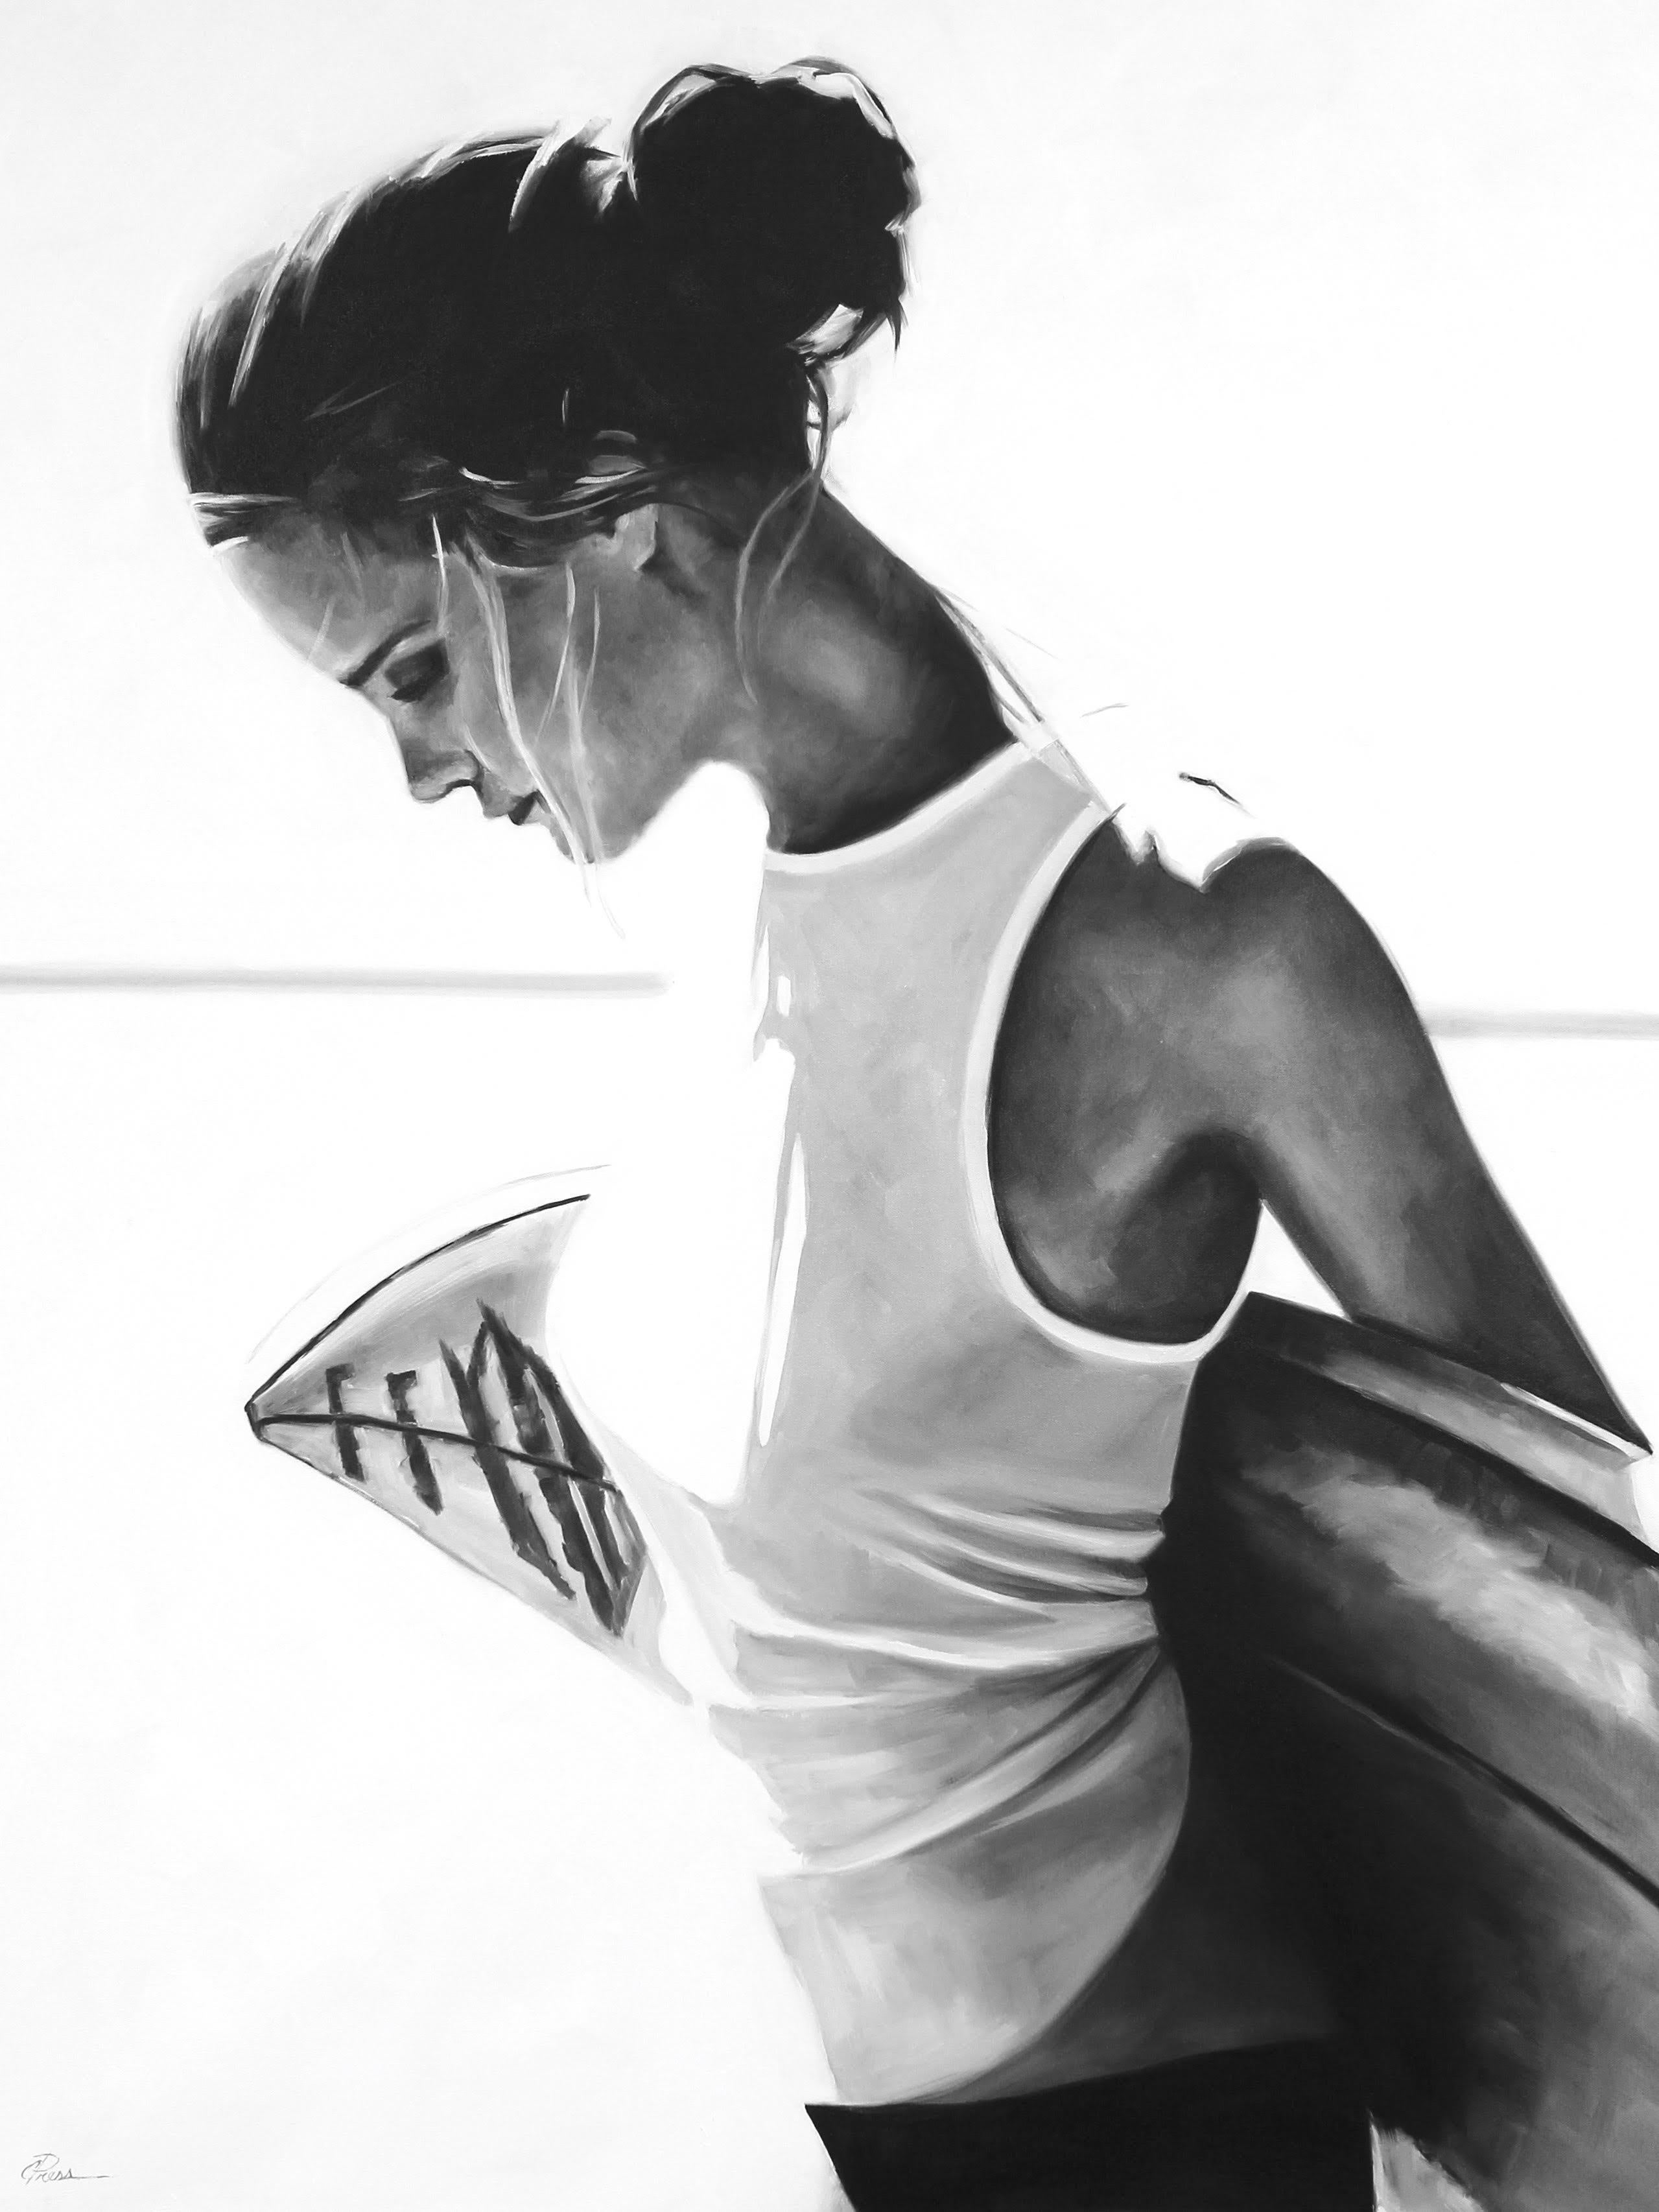 Cindy Press Figurative Painting – "Pull Me Back" black and white oil painting of woman carrying surfboard behind